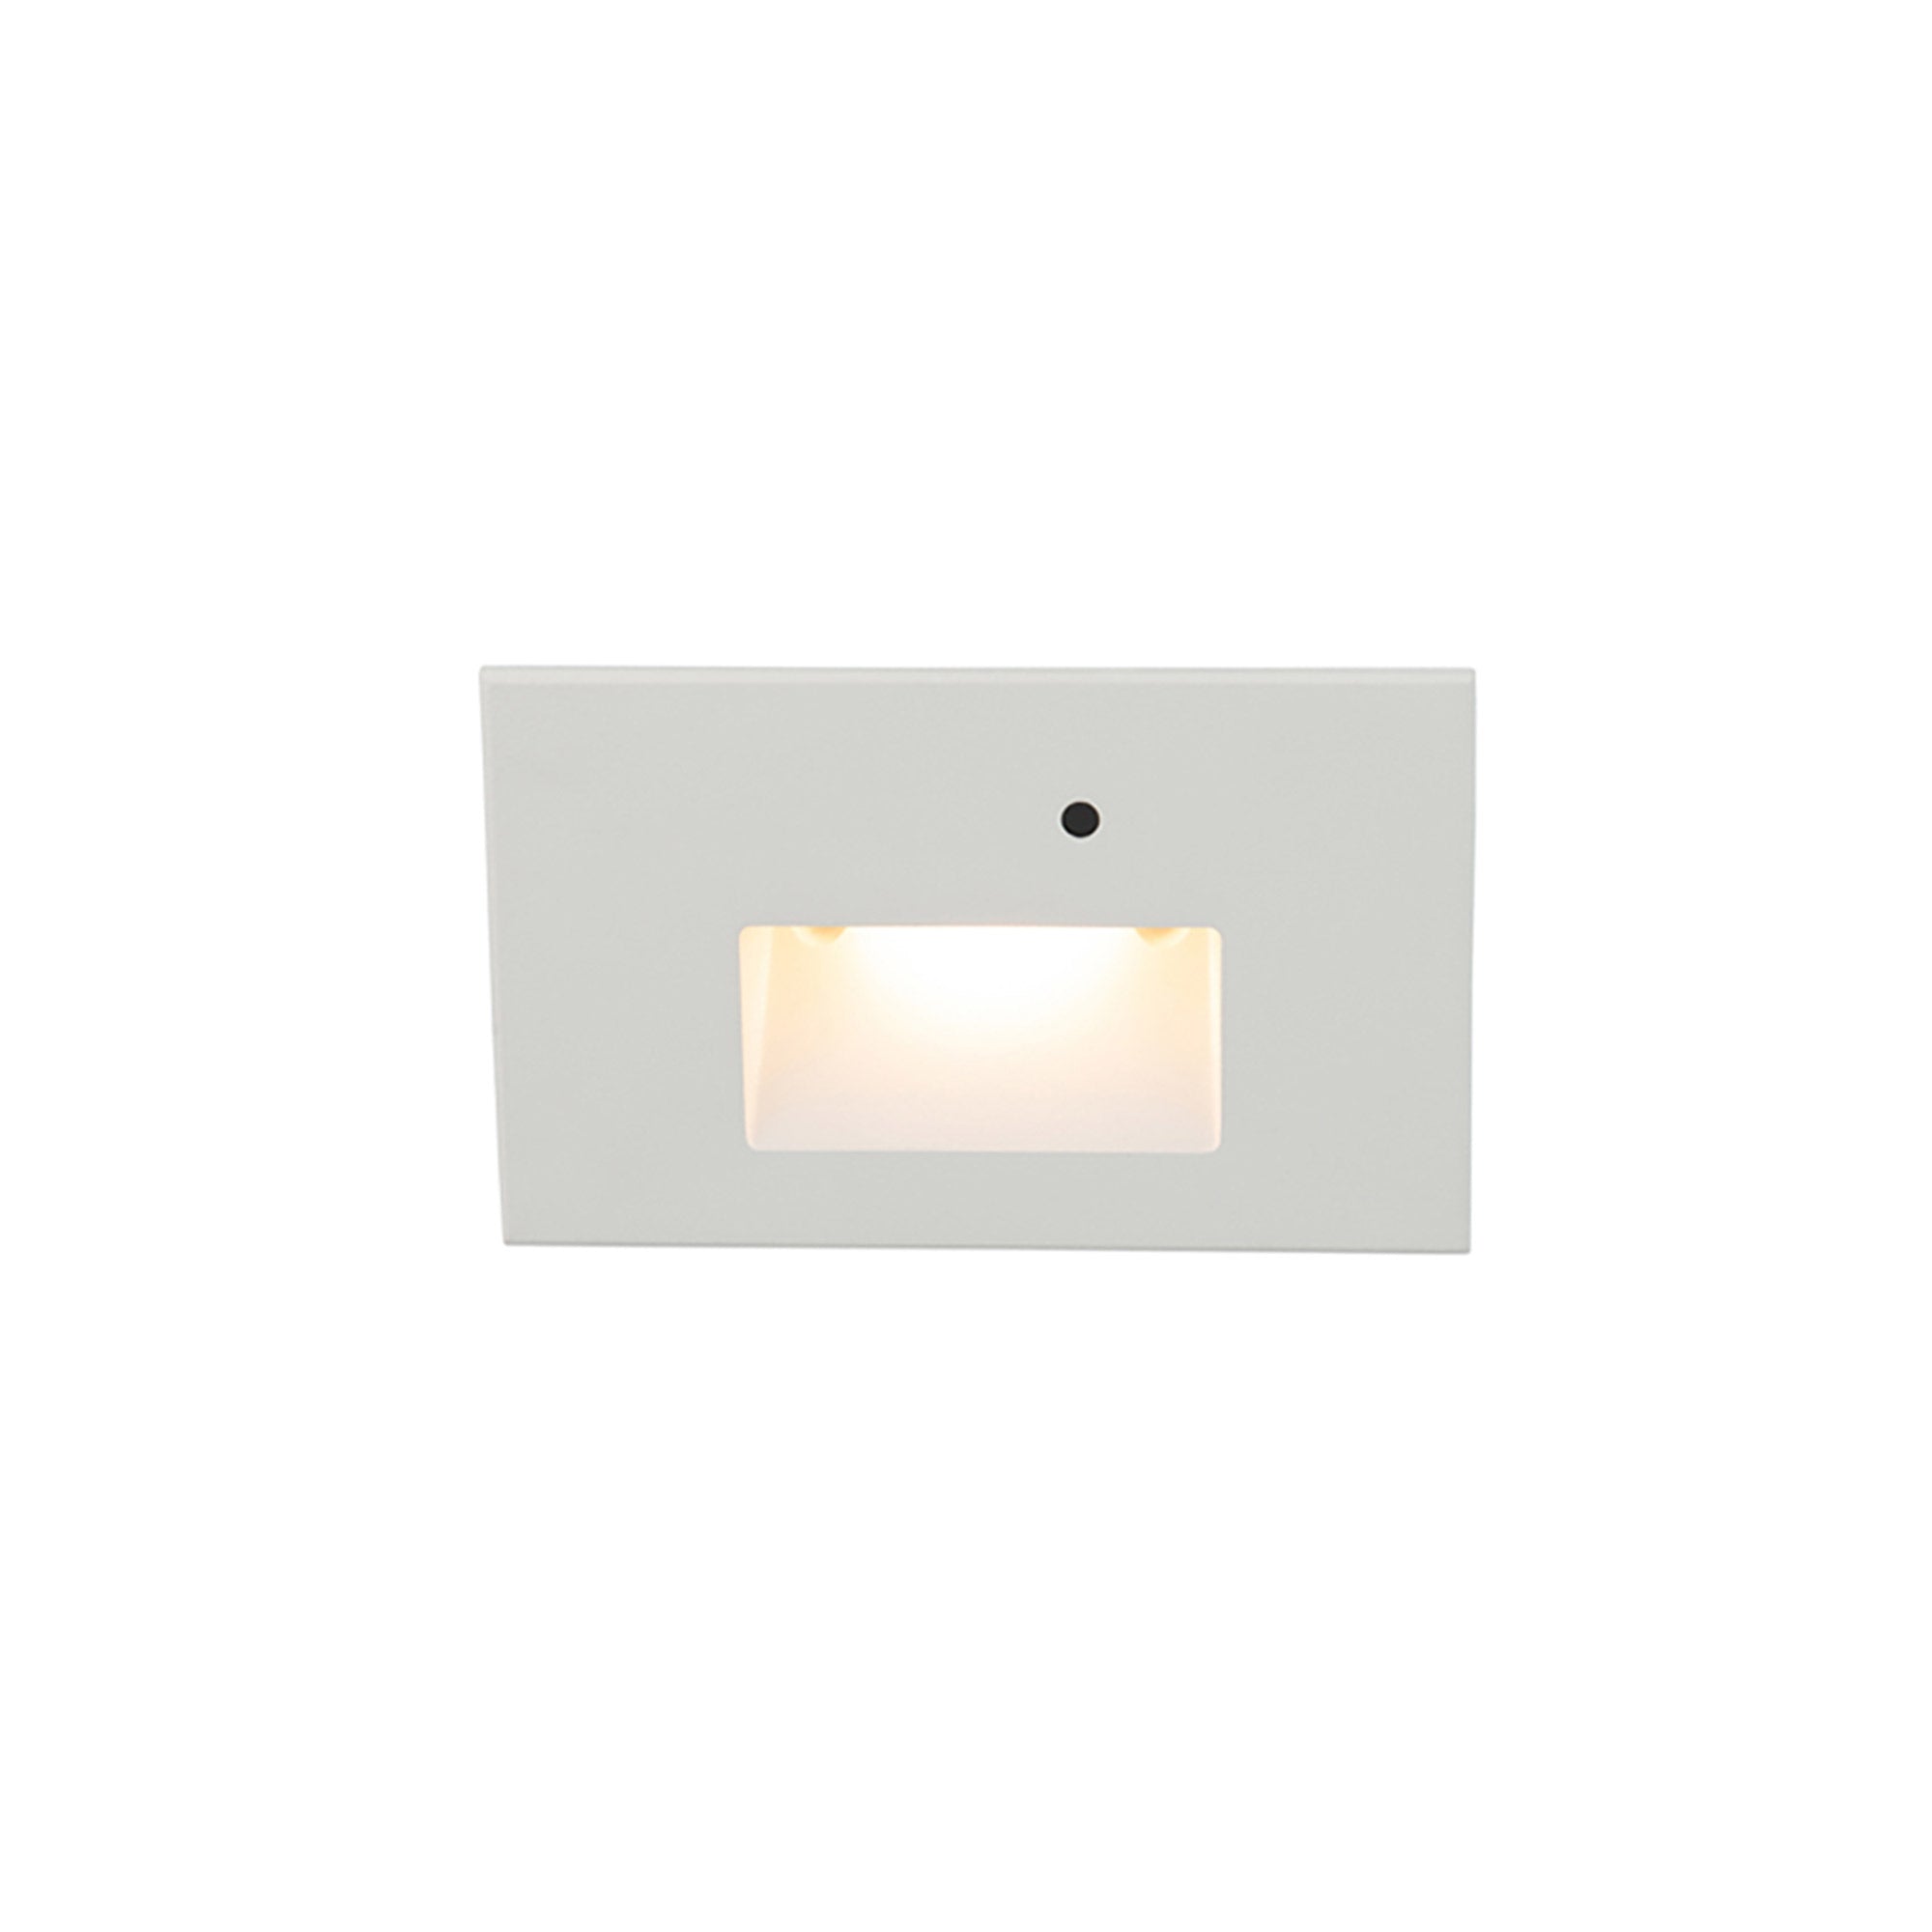 LEDme 120V LED Horizontal Indoor/Outdoor Step and Wall Light with Daylight Photocell Sensor